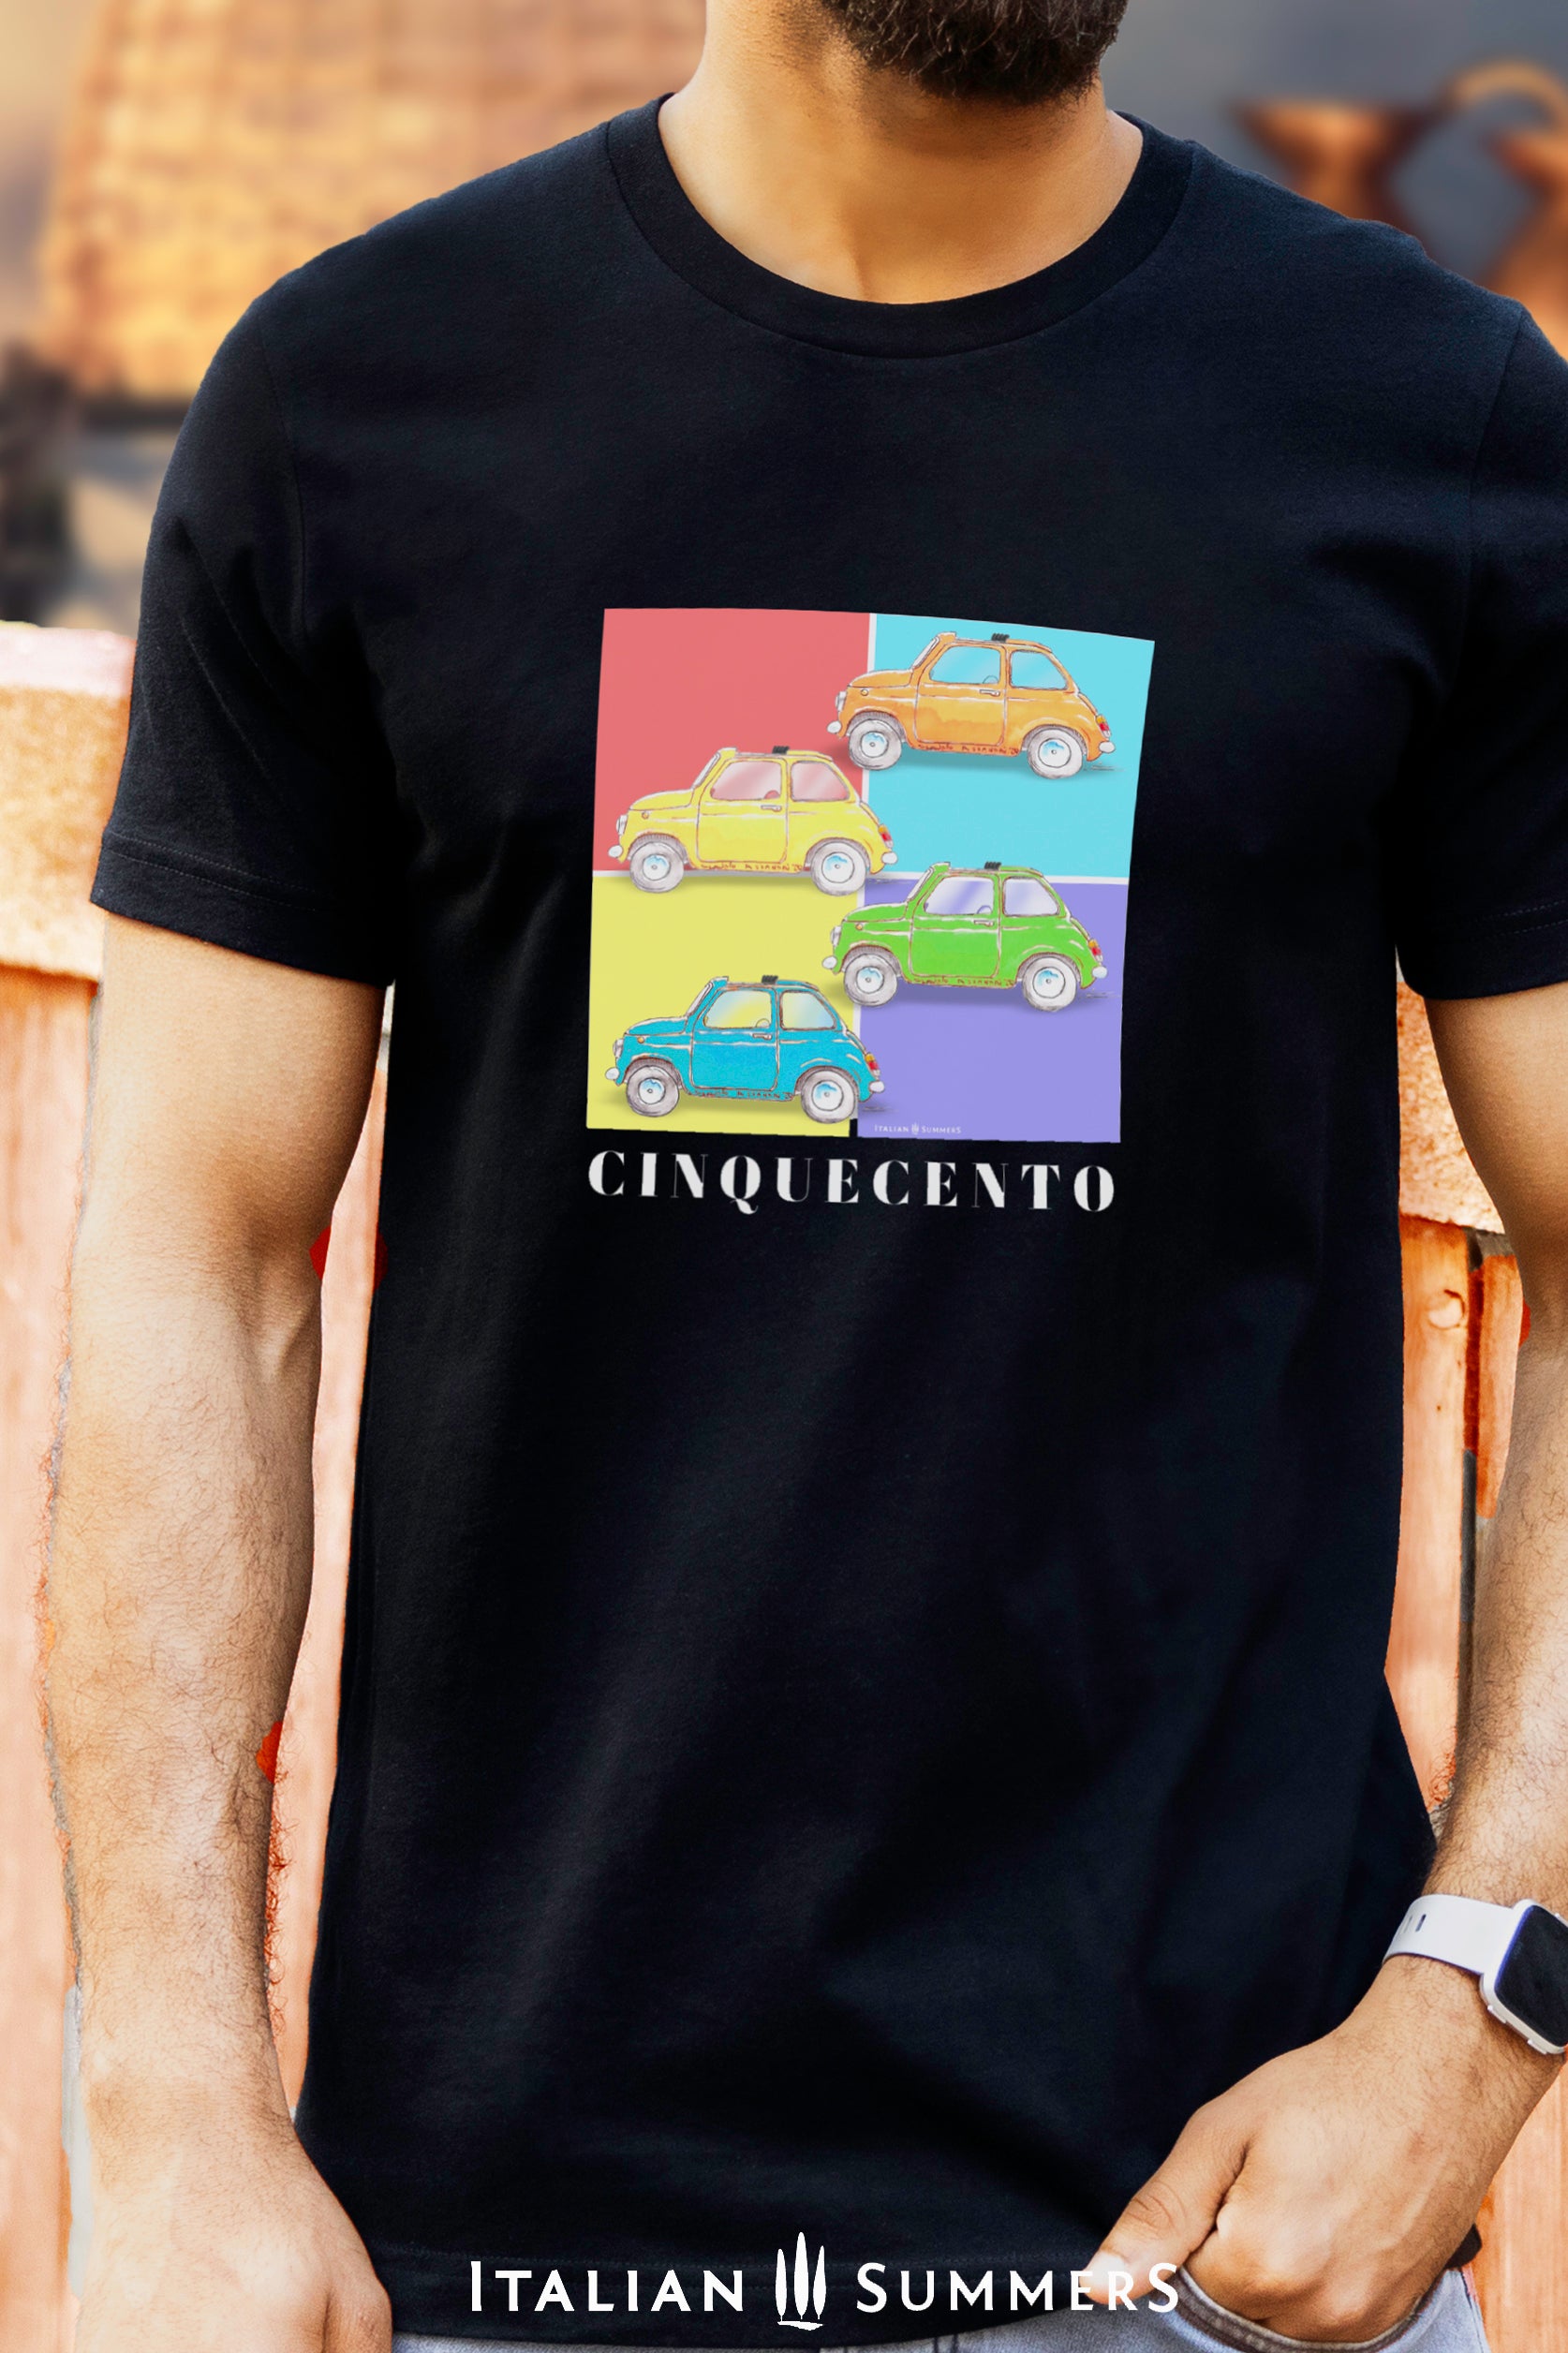 Italy white T Shirt printed with a colorful design of four vintage FIAT 500 in different vibrant colors. On the lower part of the design the title 'CINQUECENTO' made by Italian Summers